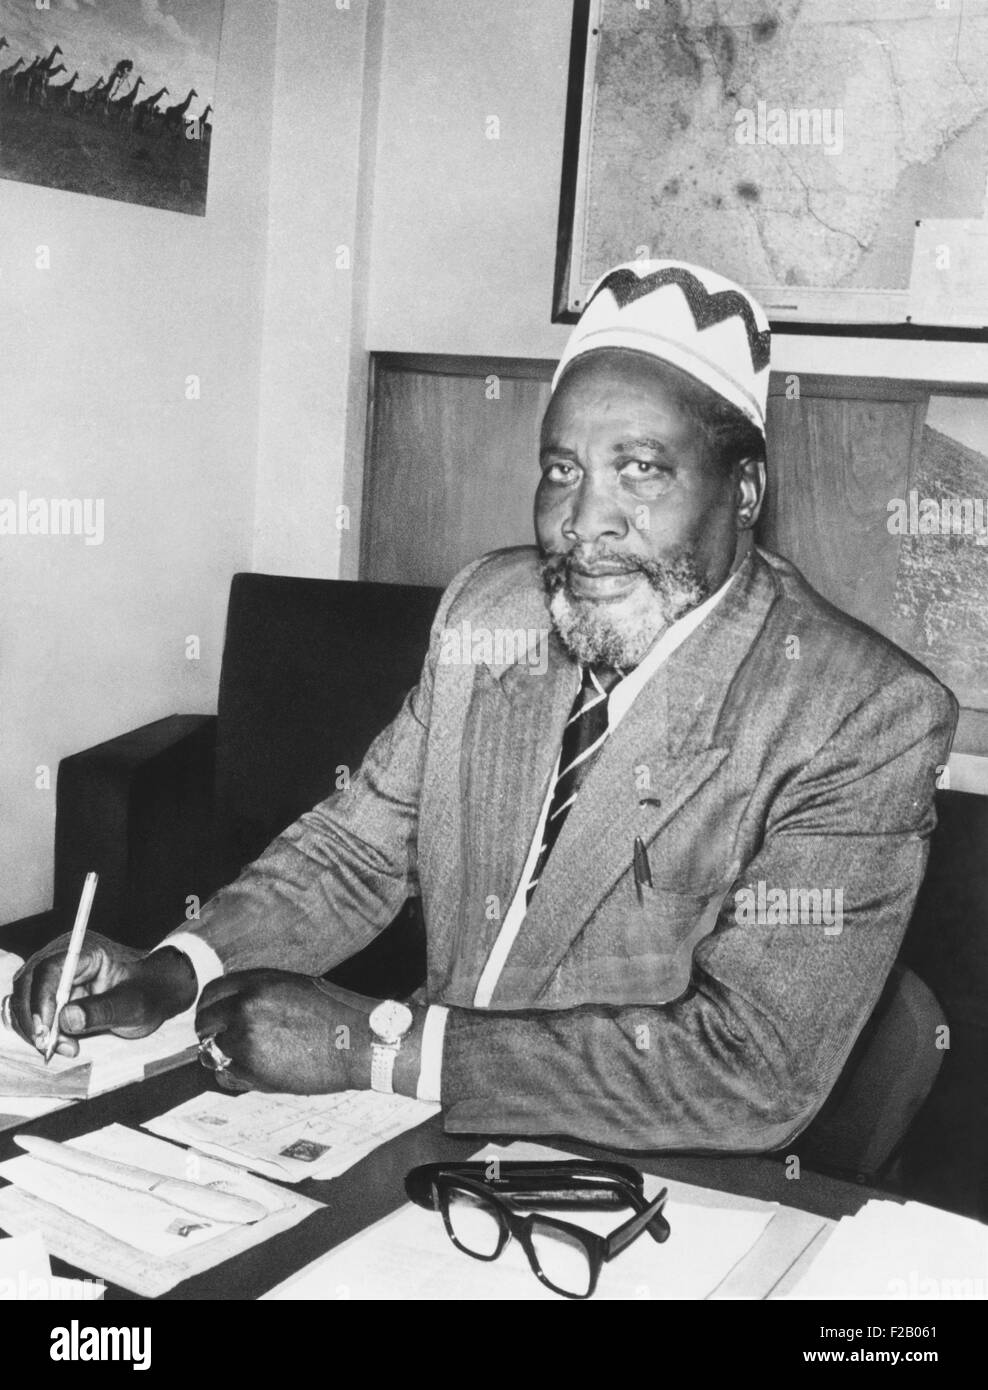 Jomo Kenyatta, shortly before Kenya was granted independence on Dec. 12, 1963. As leader of the KANU party, (Kenya African National Union), he became Prime Minister. (CSU 2015 9 685) Stock Photo